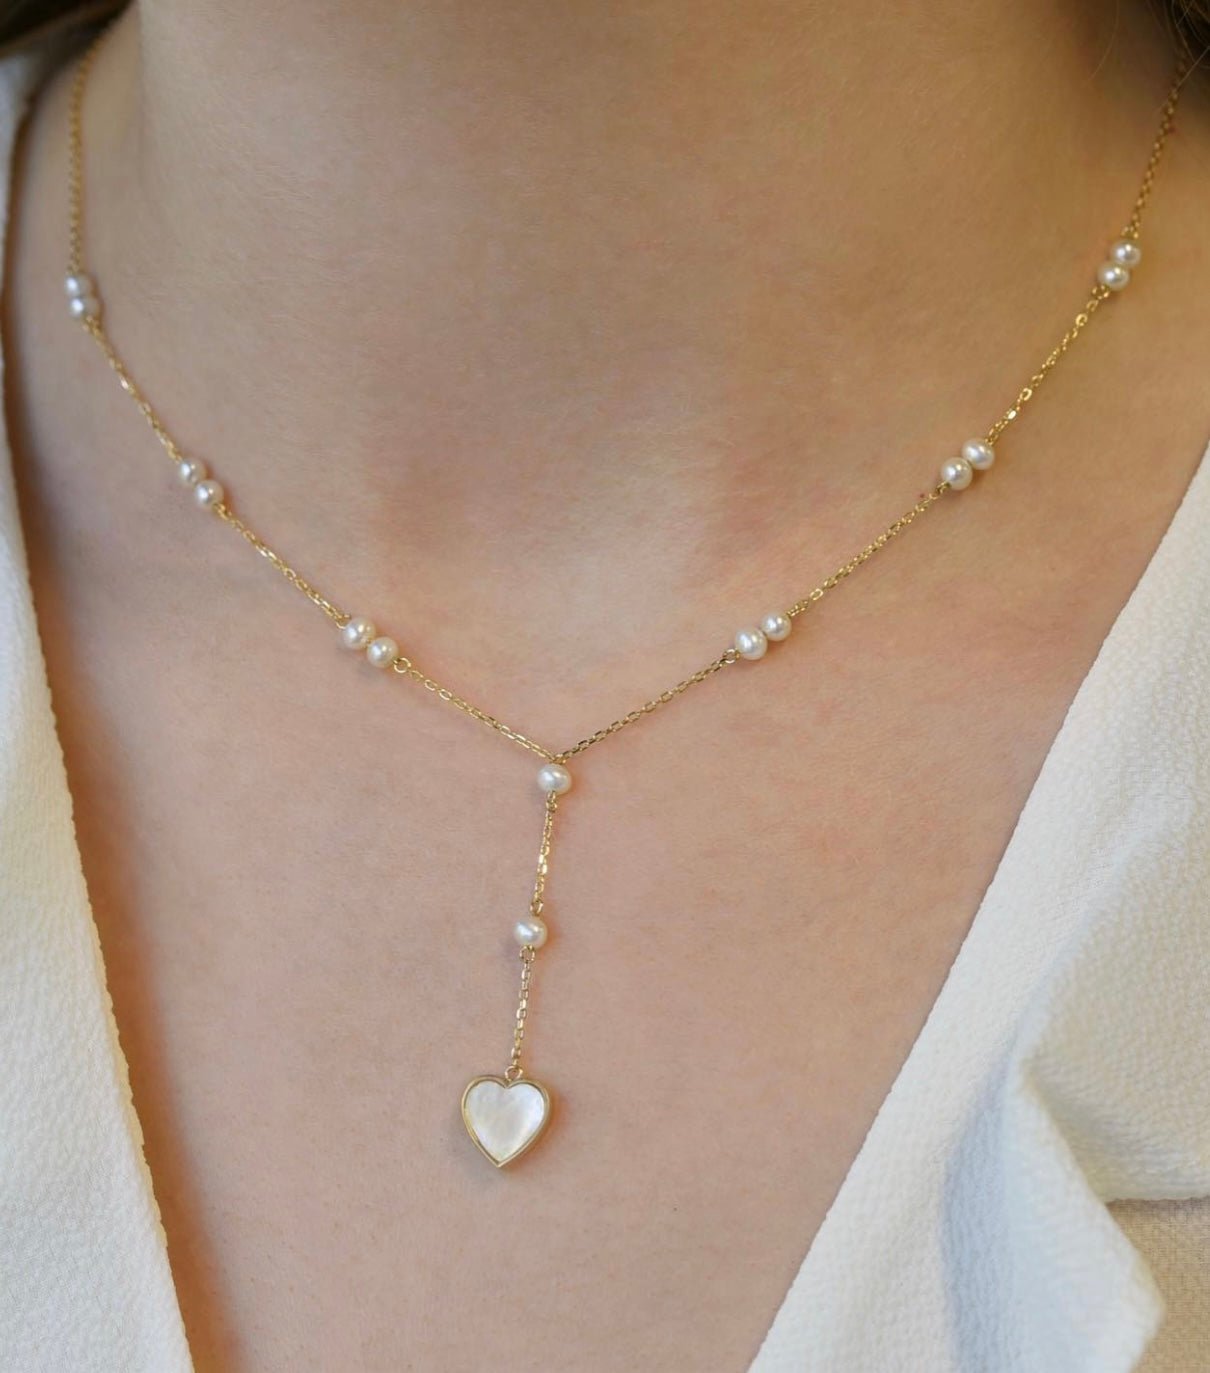 Vita Heart Necklace in Freshwater Pearl - 18k Gold - Ly